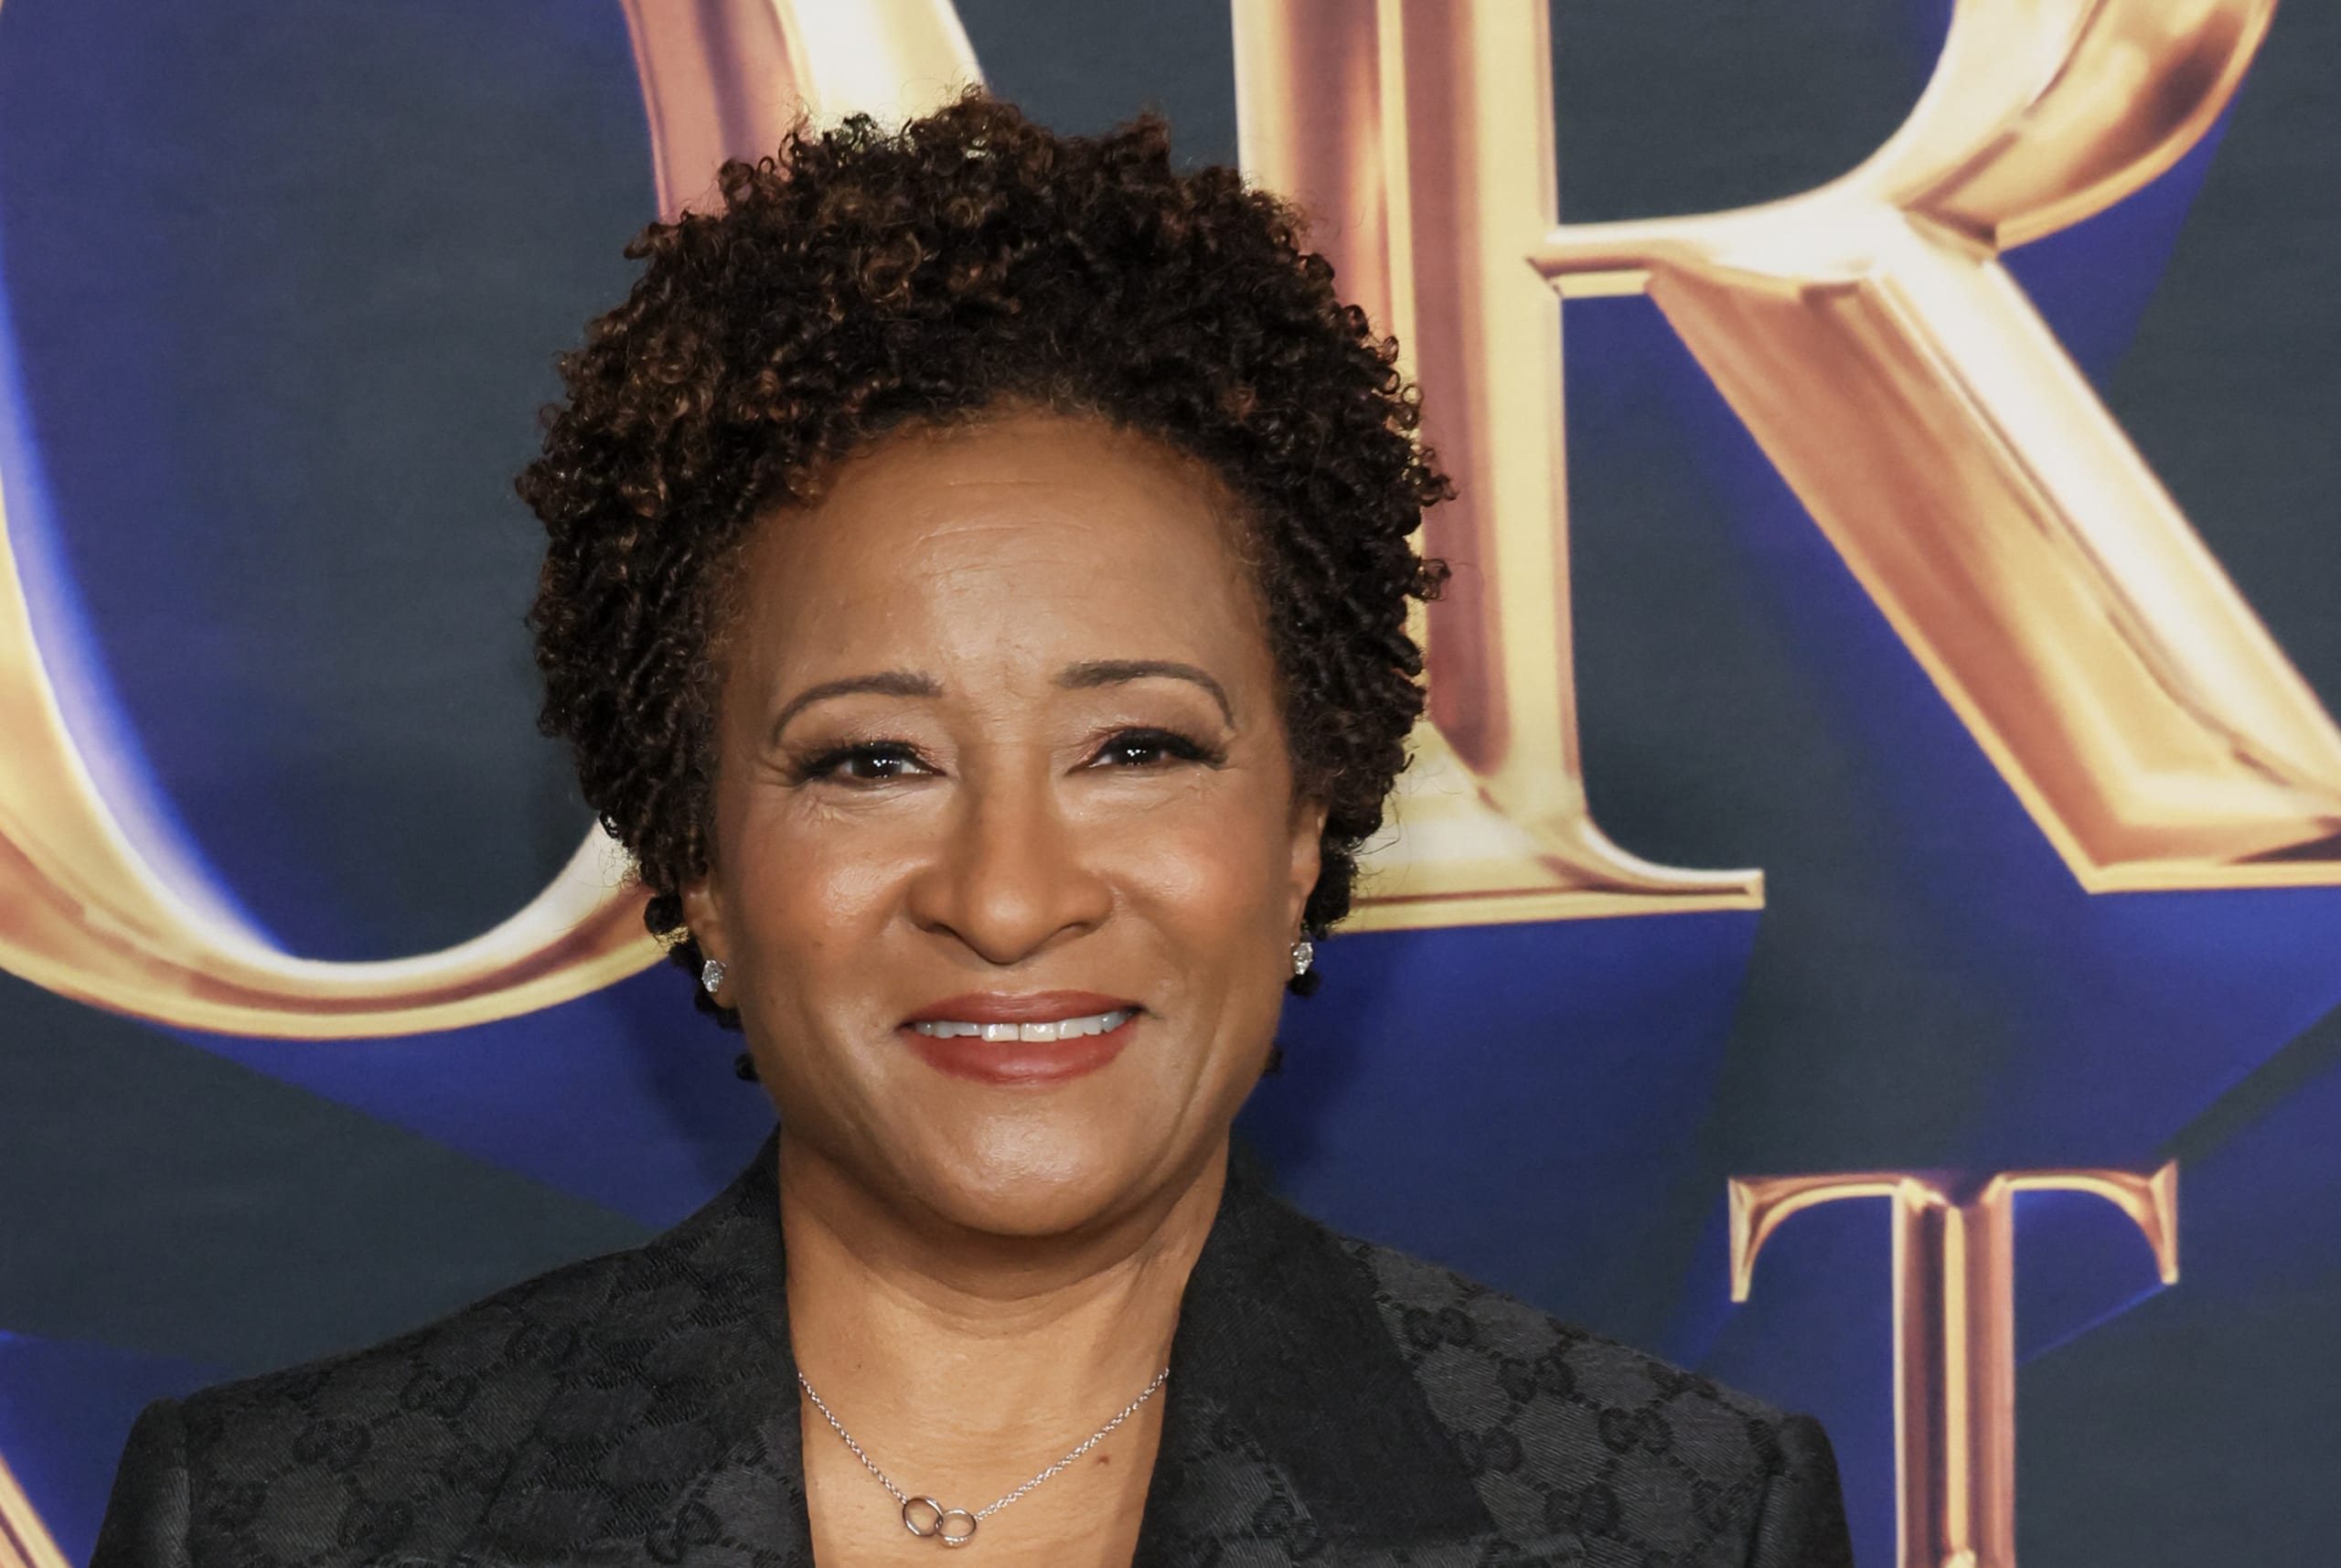 Wanda Sykes is so funny that paramedics had to help a man who laughed too hard